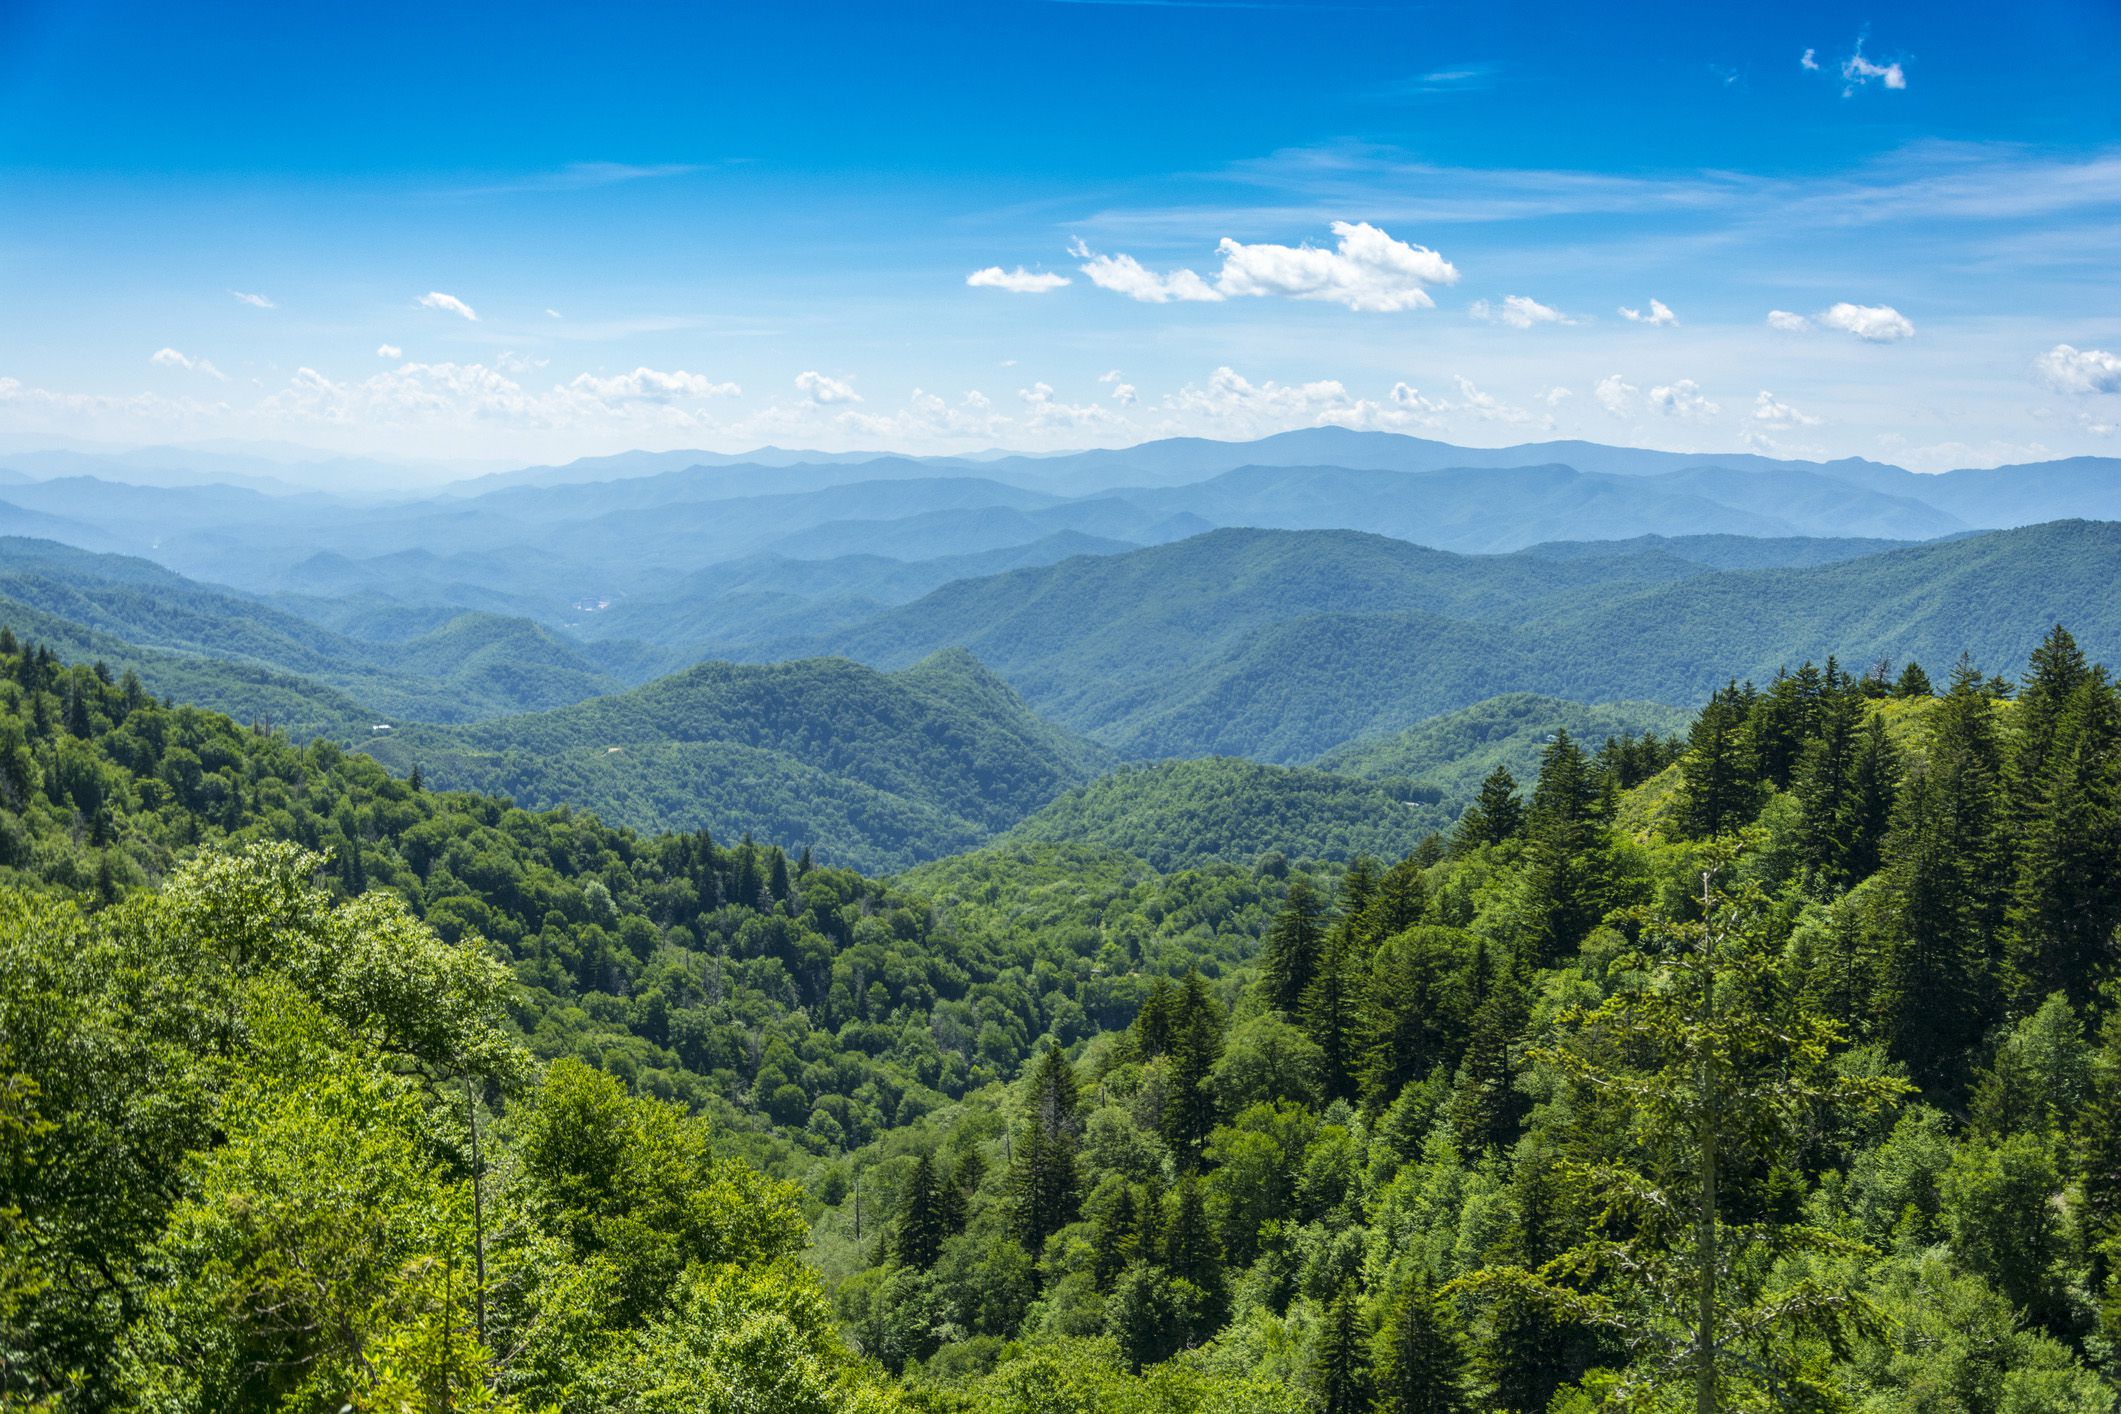 <p>One of Great Smoky Mountains National Park's most popular attractions, <a href="https://www.nps.gov/grsm/planyourvisit/cadescove.htm">Cades Cove in Tennessee</a> offers visitors some of the best opportunities to catch glimpses of wildlife, including black bears, coyotes, and wild turkeys. An 11-mile loop road affords scenic views and a leisurely tour of the valley. Along the way, check out restored 18th- and 19th-century houses, barns, mills, and churches.</p>